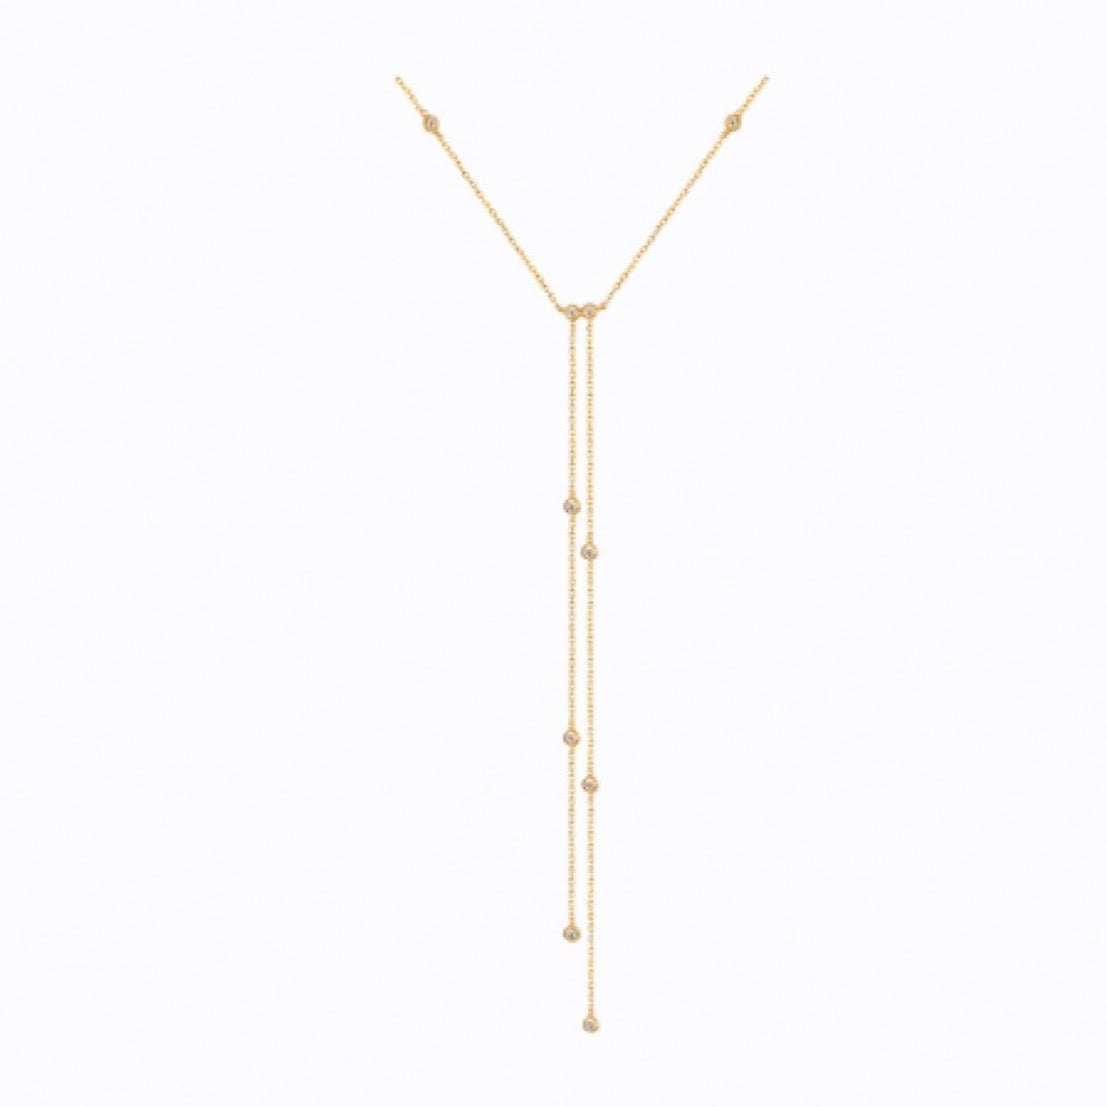 Paired Drop Long Lariat Necklace, 14ct Gold Plate